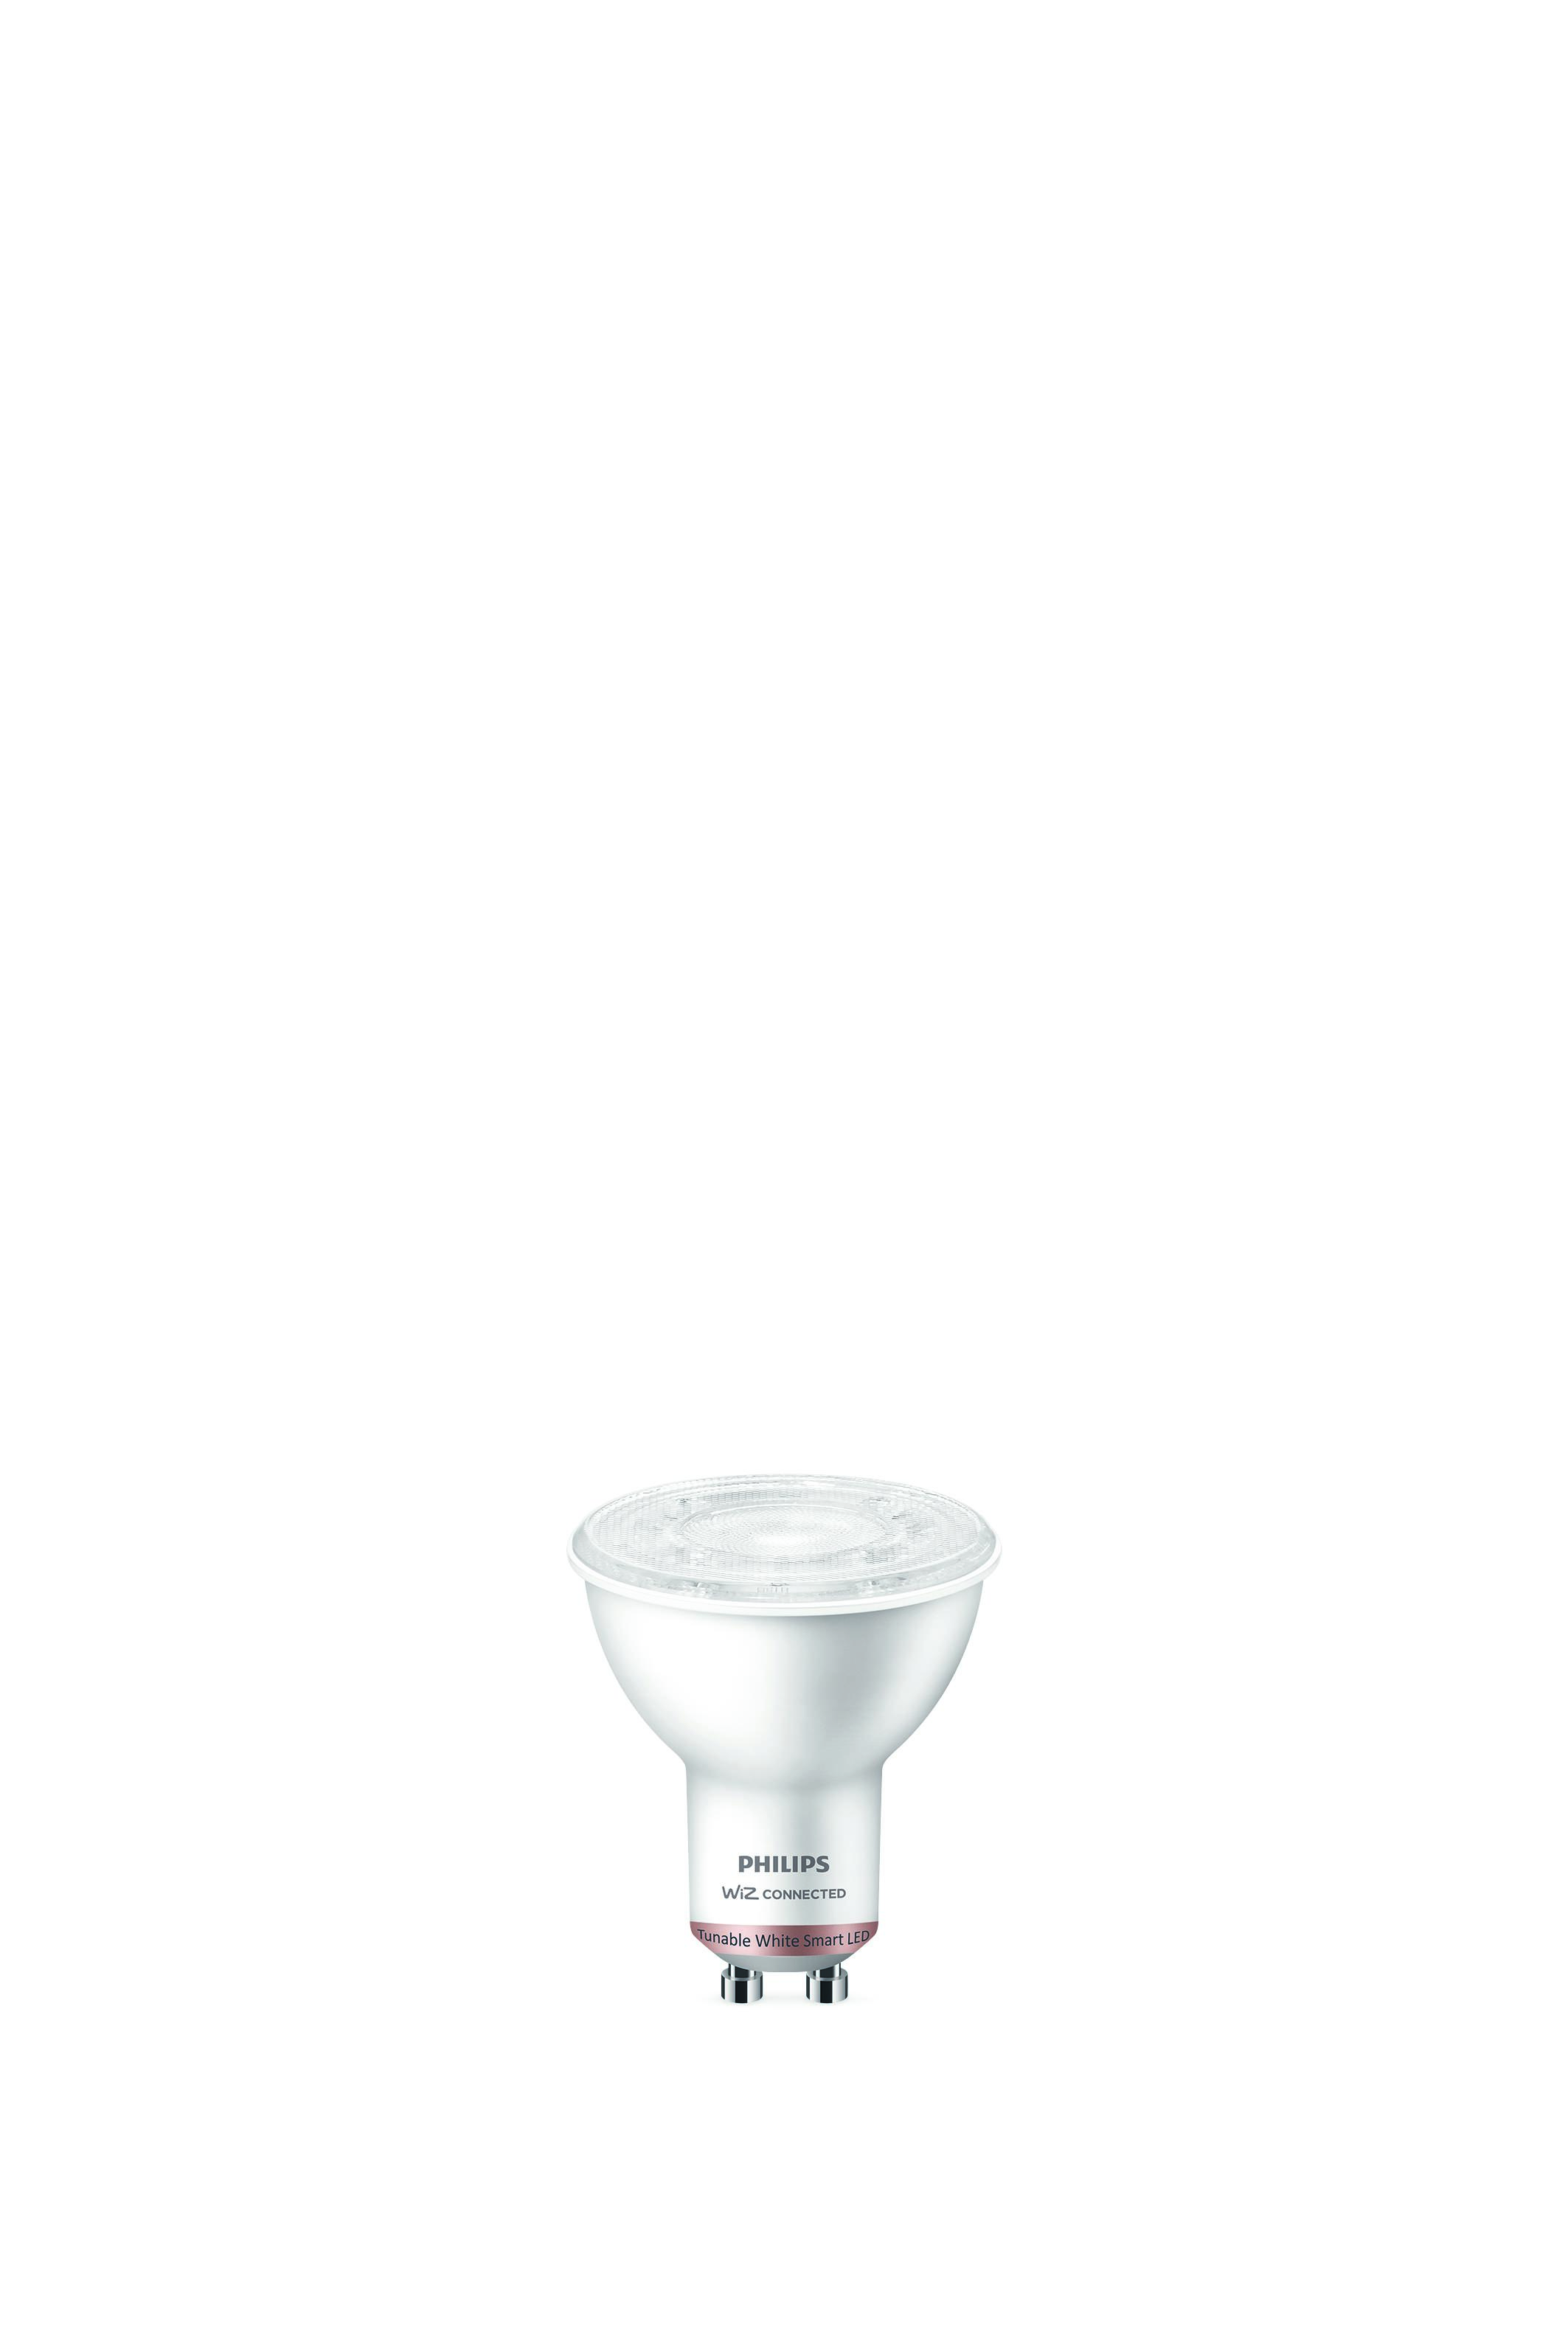 PHILIPS Smart LED GU10, WiZ connected, 4,7 W, 345 lm, dimmbar